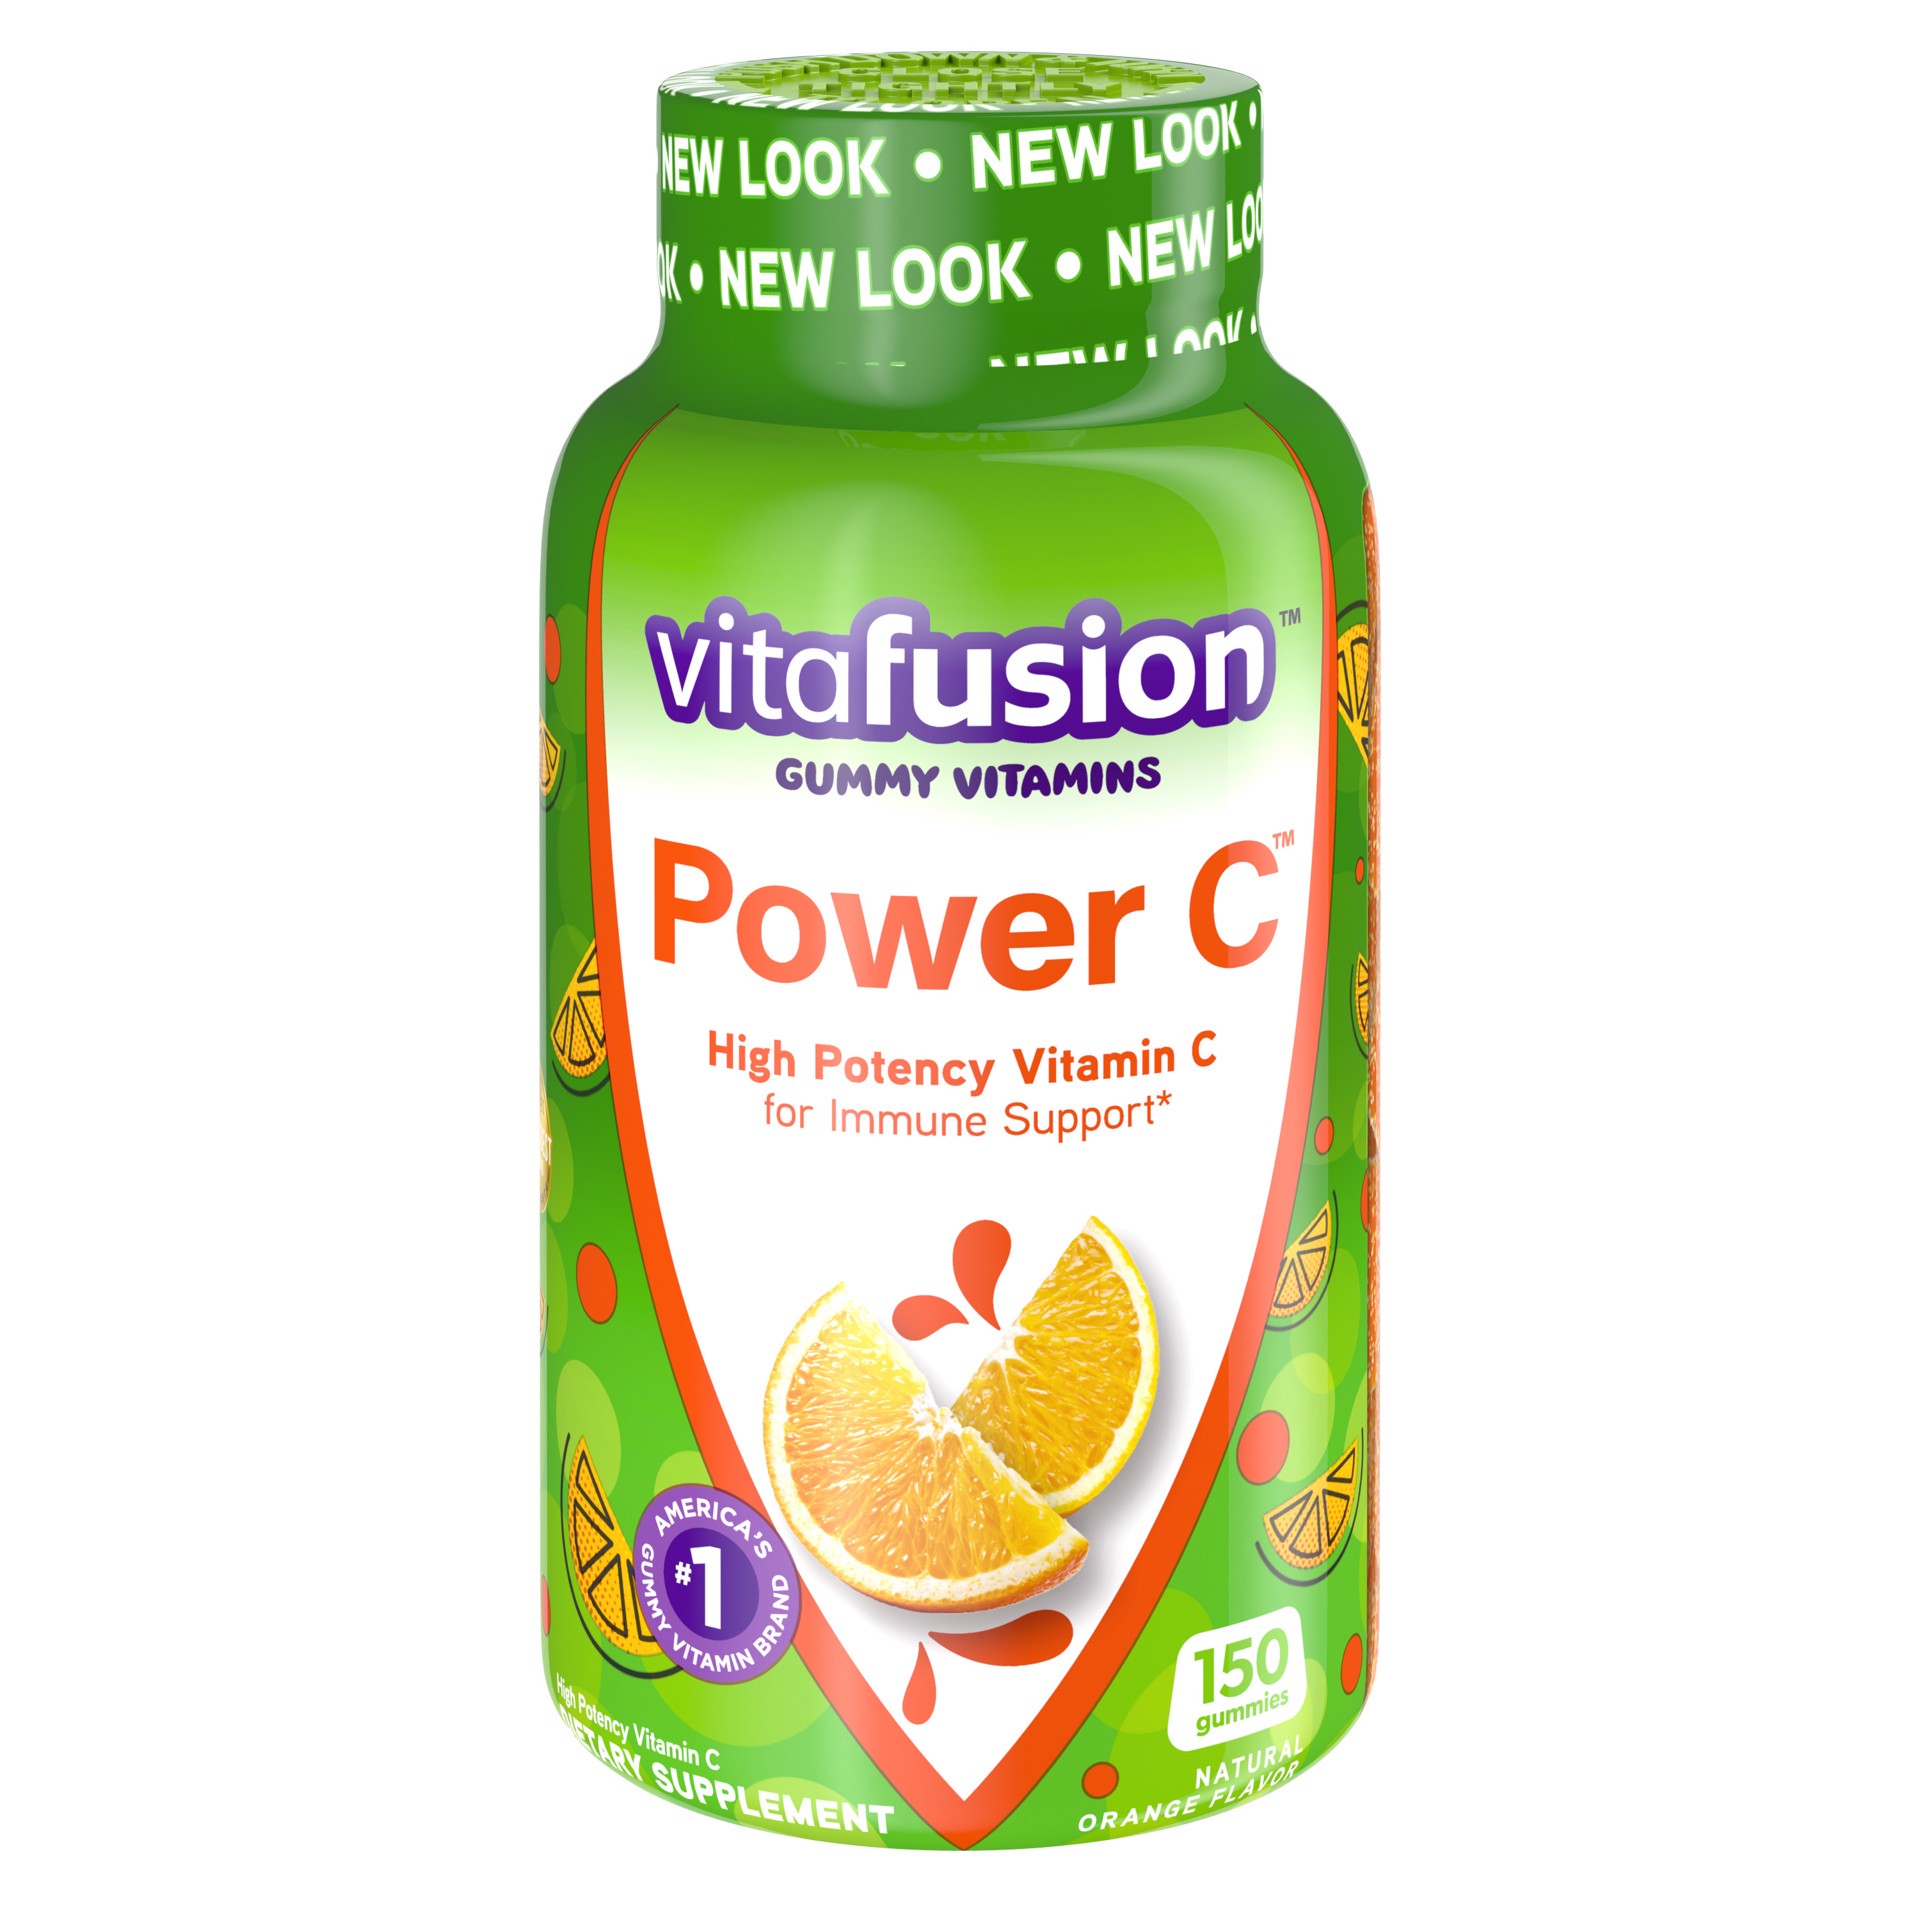 slide 1 of 78, vitafusion Power C Gummy Immune Support* with vitamin C, Delicious Orange Flavor, 150ct (50 day supply), from America's Number One Gummy Vitamin Brand, 150 cnt